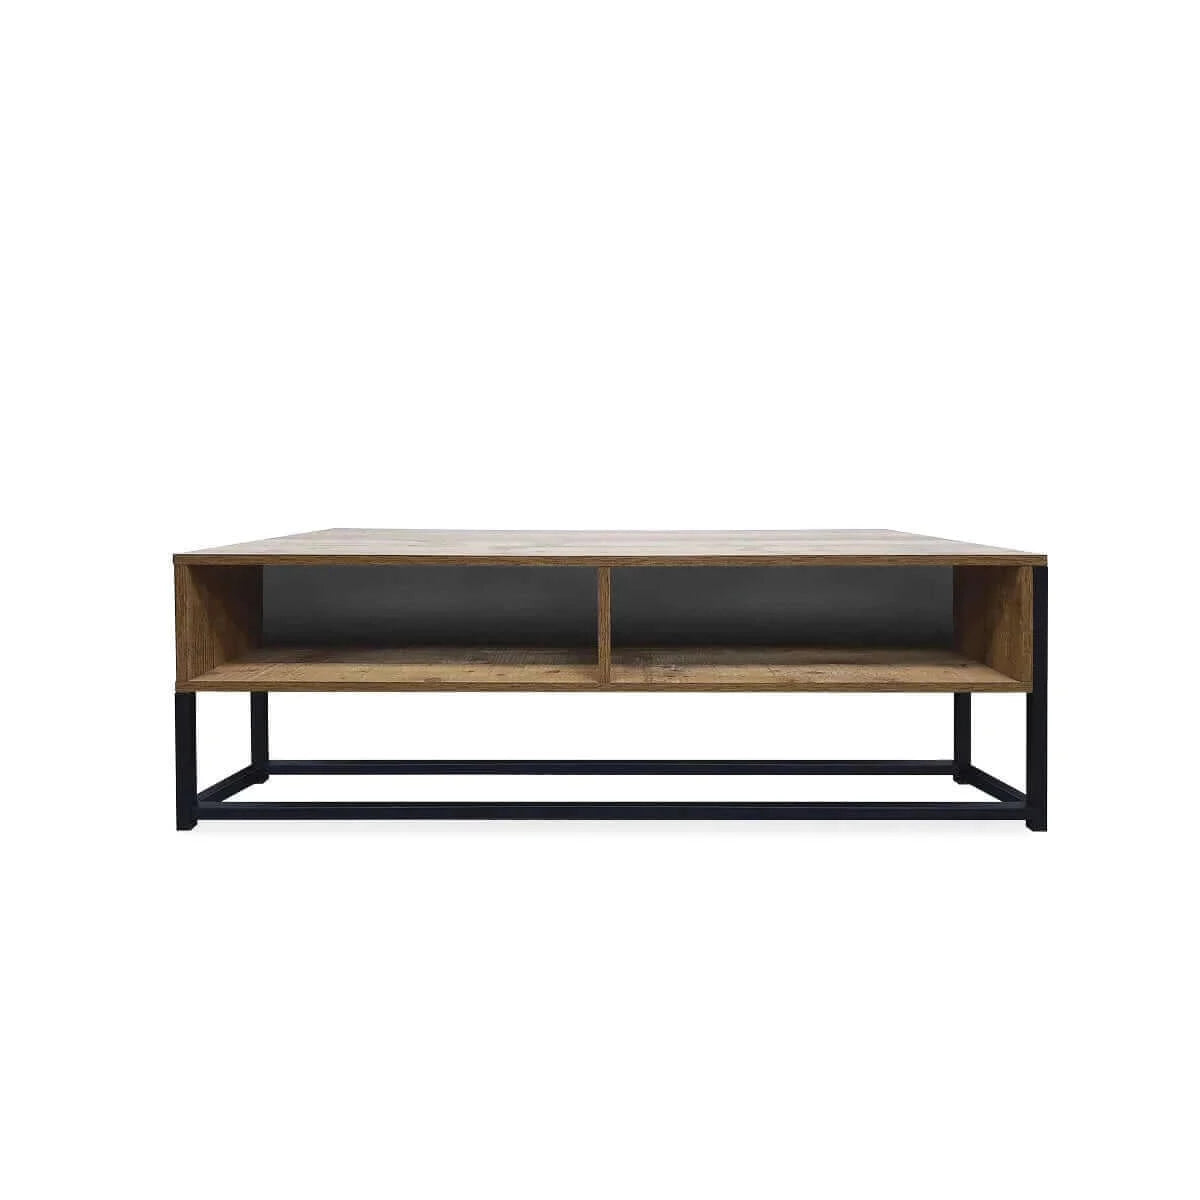 Home Master Vogue Wood Tone Coffee Table Stylish Rustic Flawless Design 110cm-Upinteriors